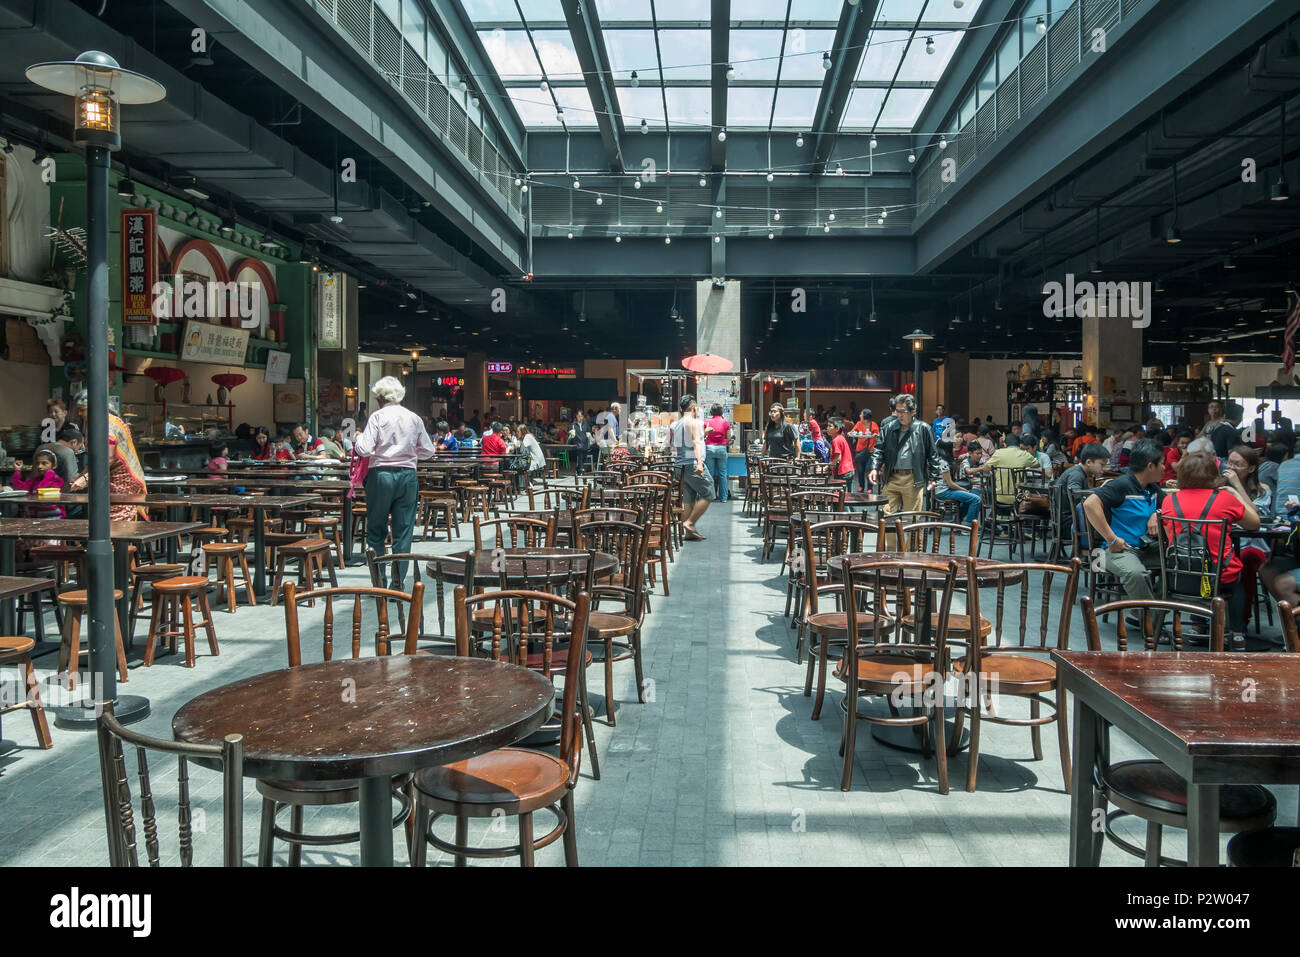 Genting Highlands,Malaysia - October 18,2017 : People can seen having their food in the food court in Sky Avenue Genting Highlands. Stock Photo